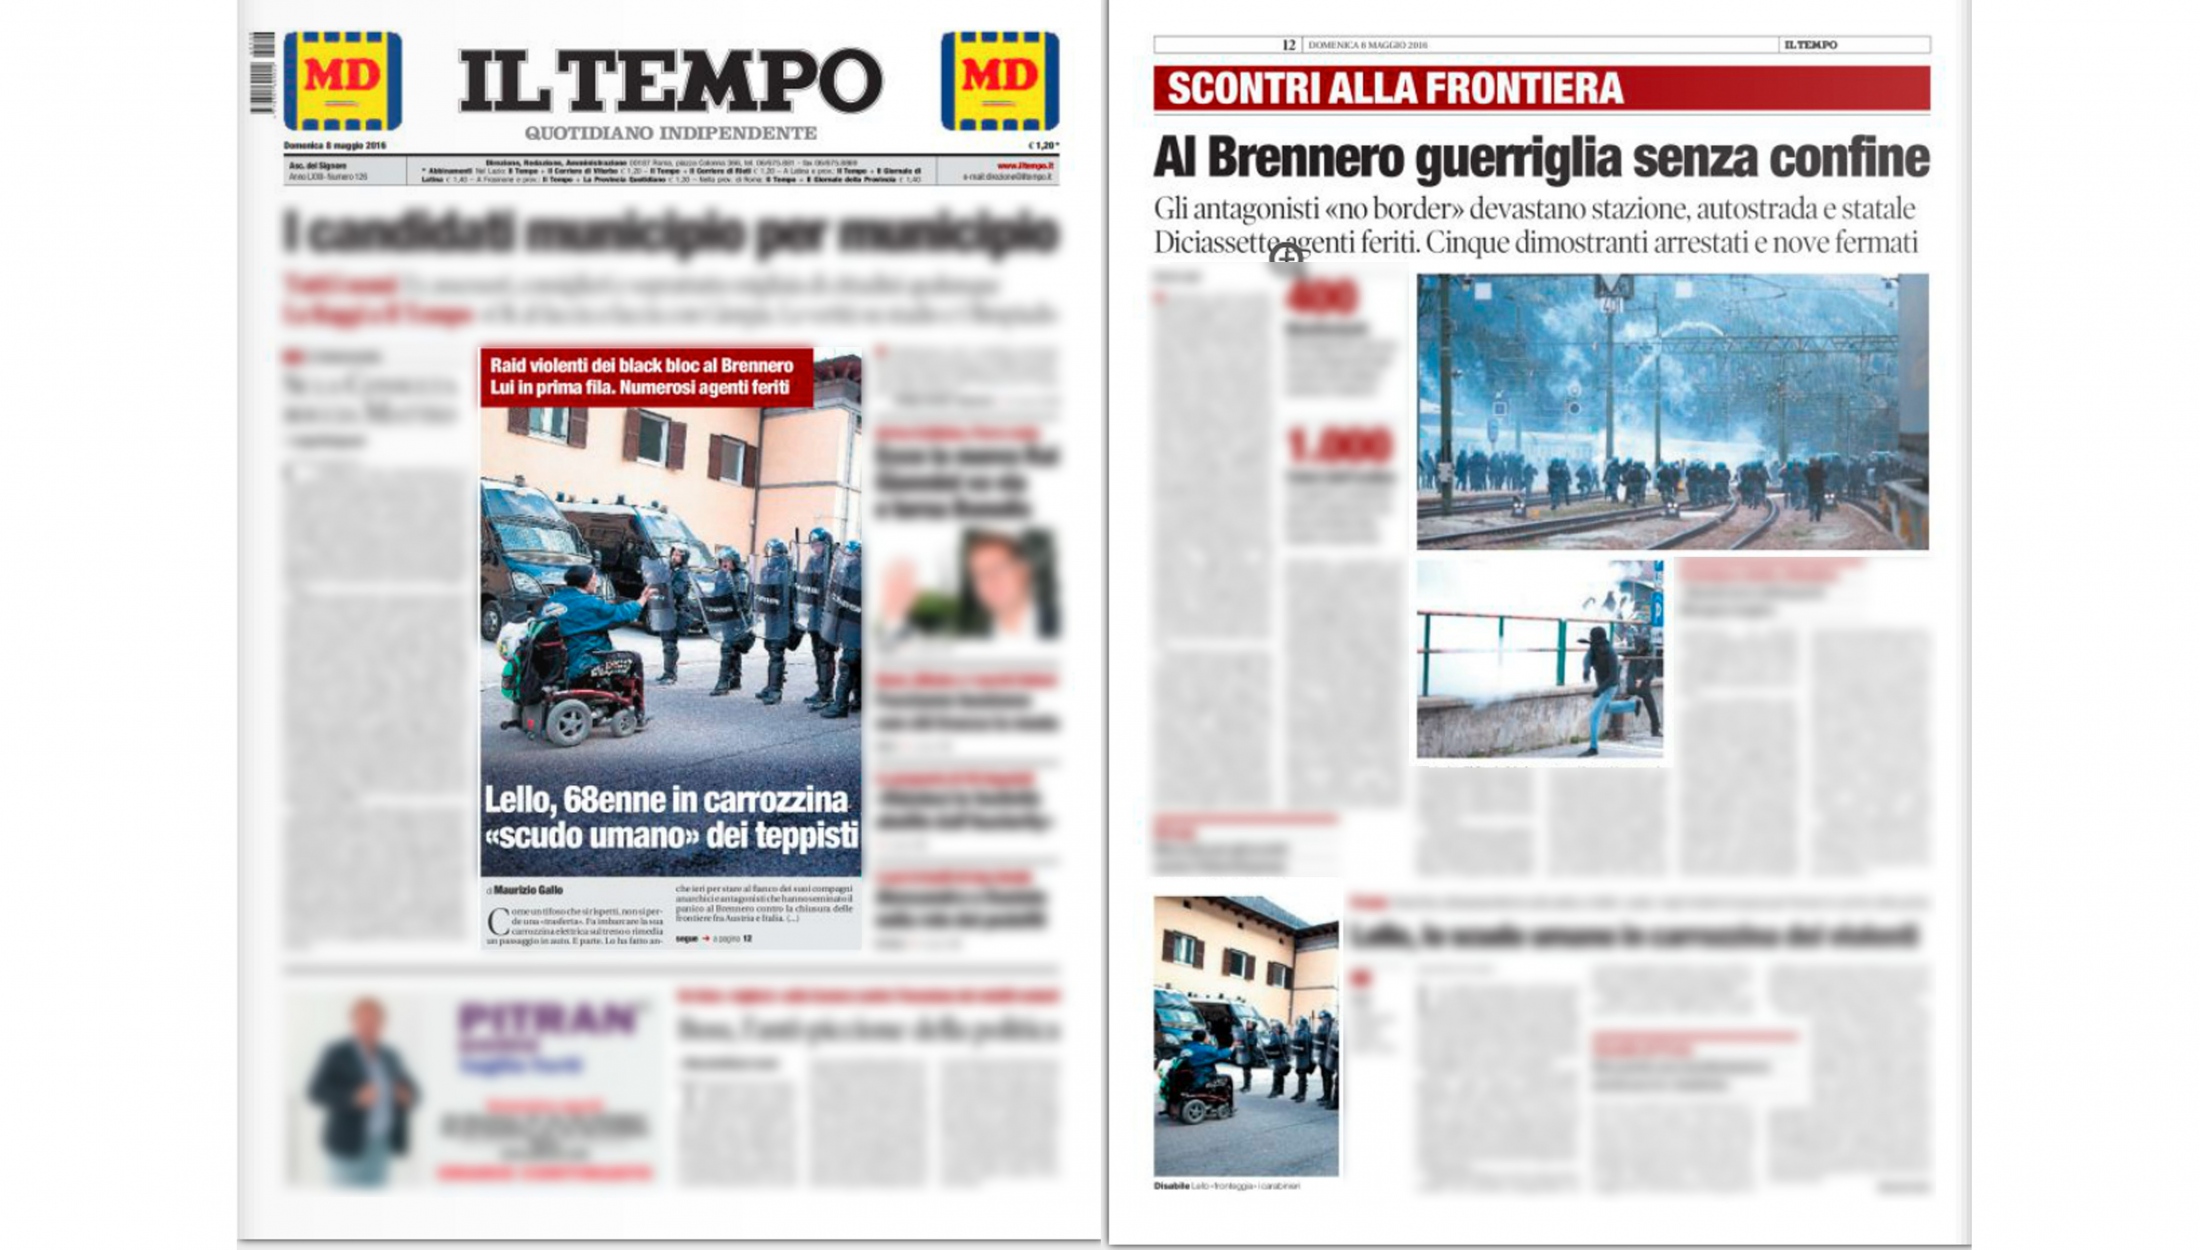 Tearsheets - Il Tempo 05/08/16 - Cover